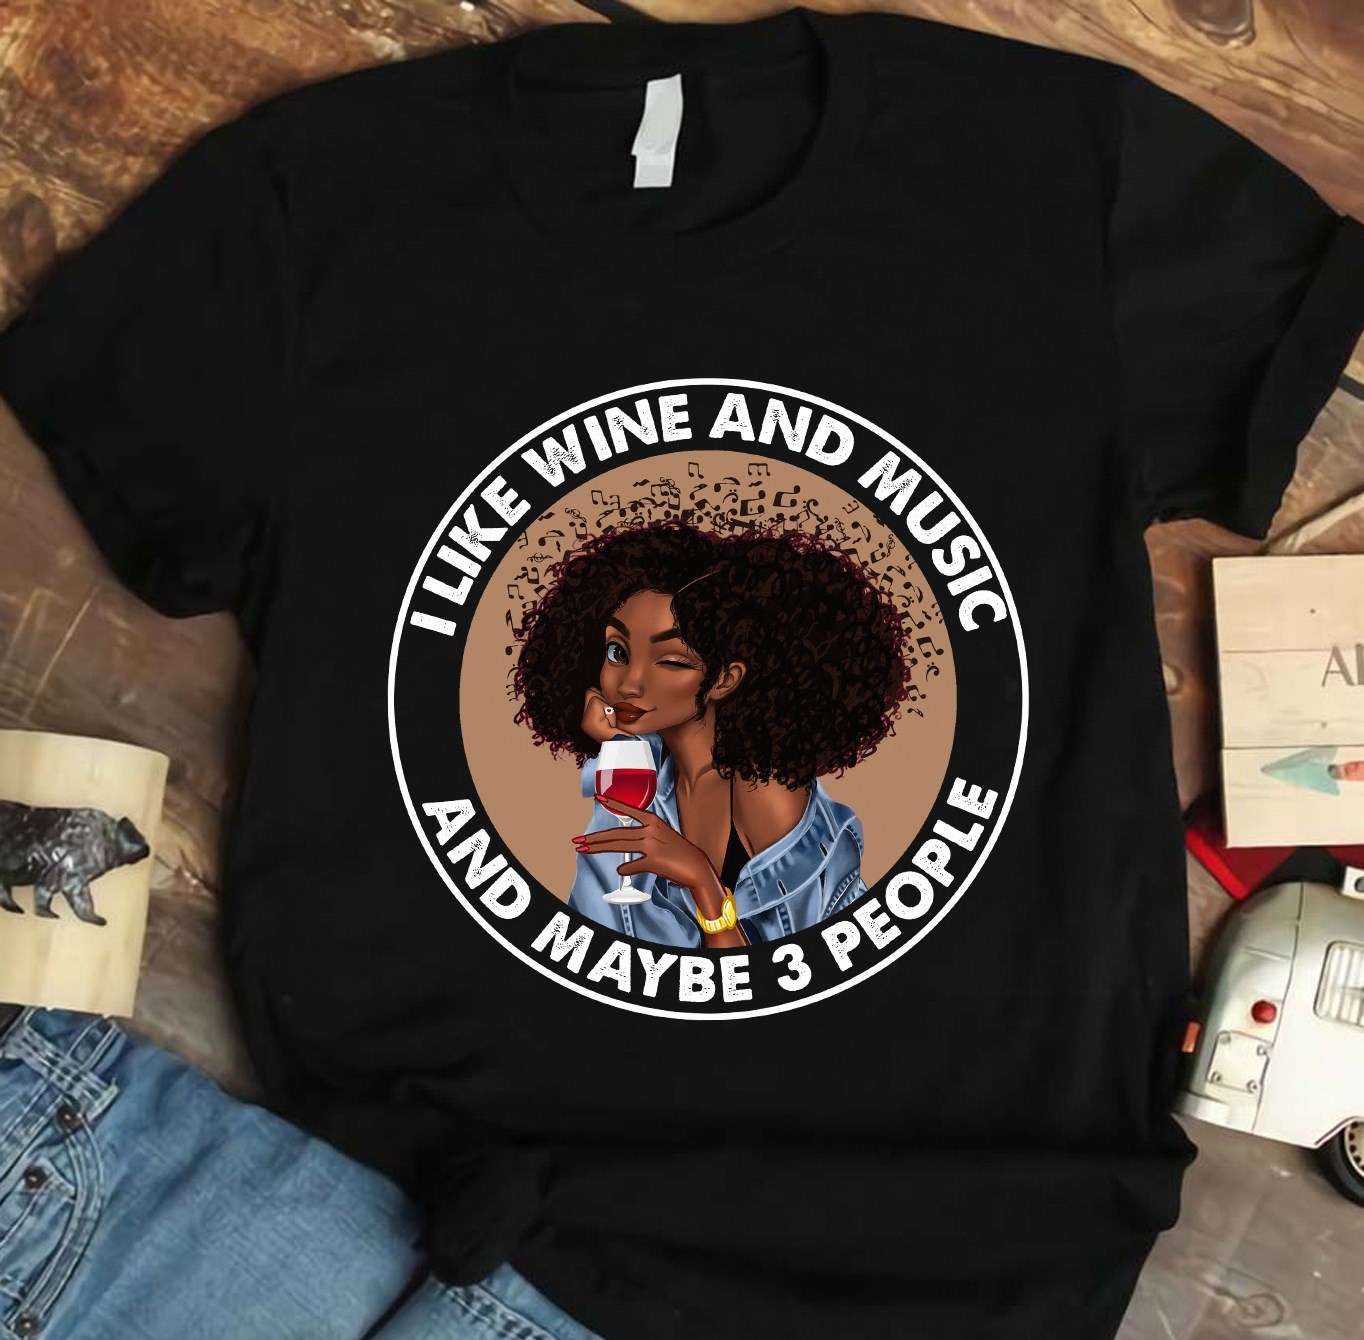 I like wine and music and maybe 3 people - Black women